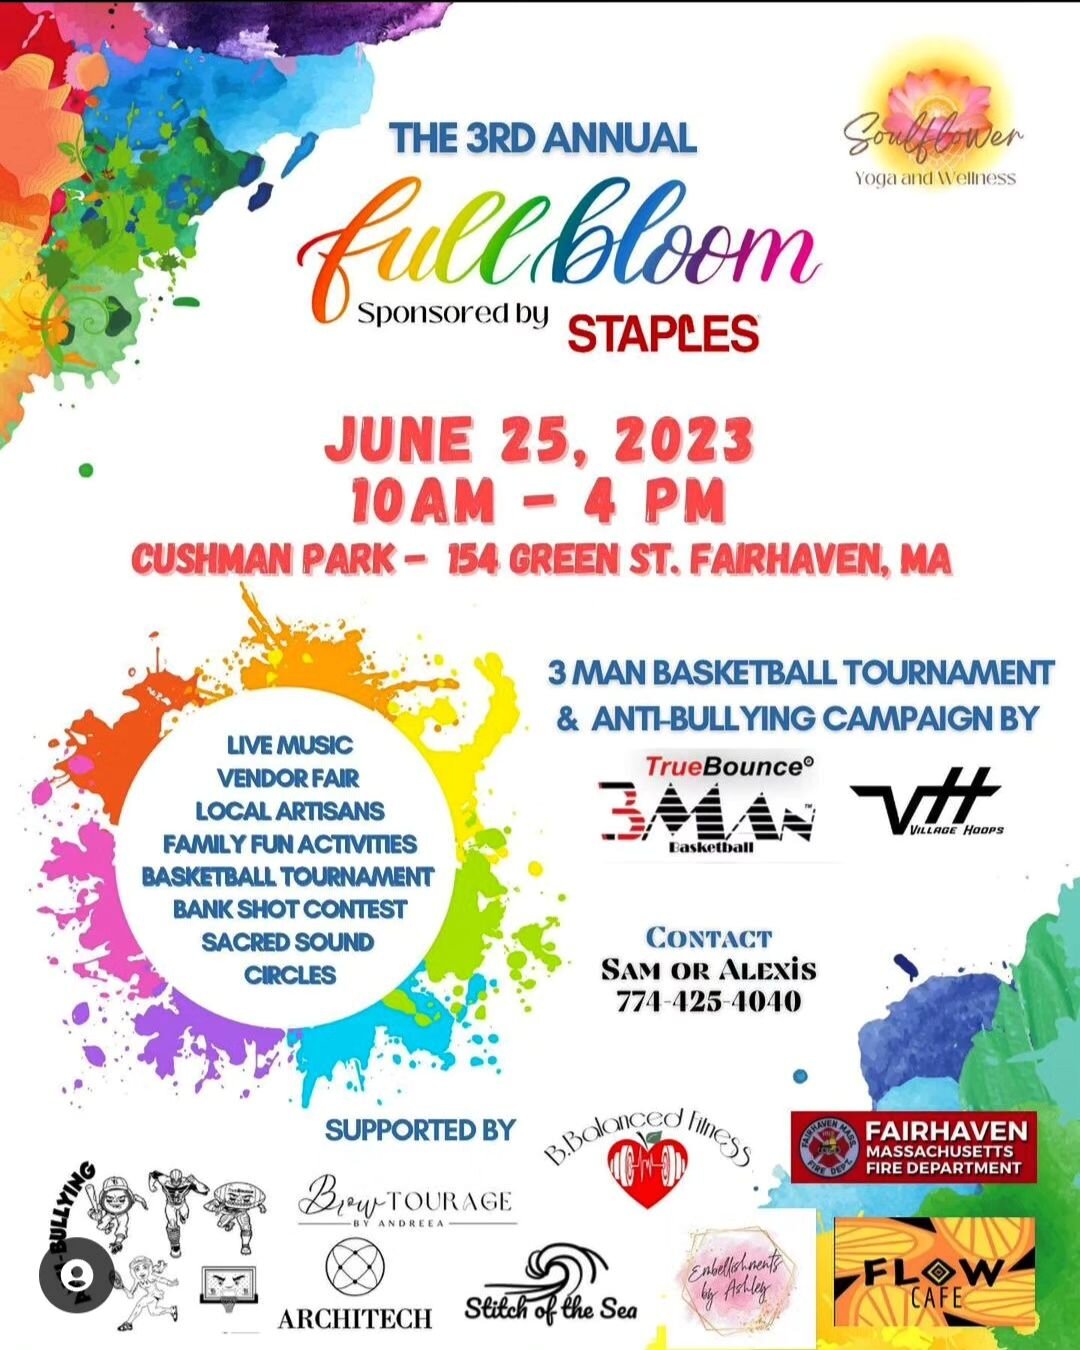 Taken from my Facebook page: 

Friends! Looking for something to do tomorrow? If so, check out this awesome event that is happening at Cushman Park in Fairhaven, MA from 10am to 4pm, which is being hosted by @soulfloweryogawellness and sponsored by @